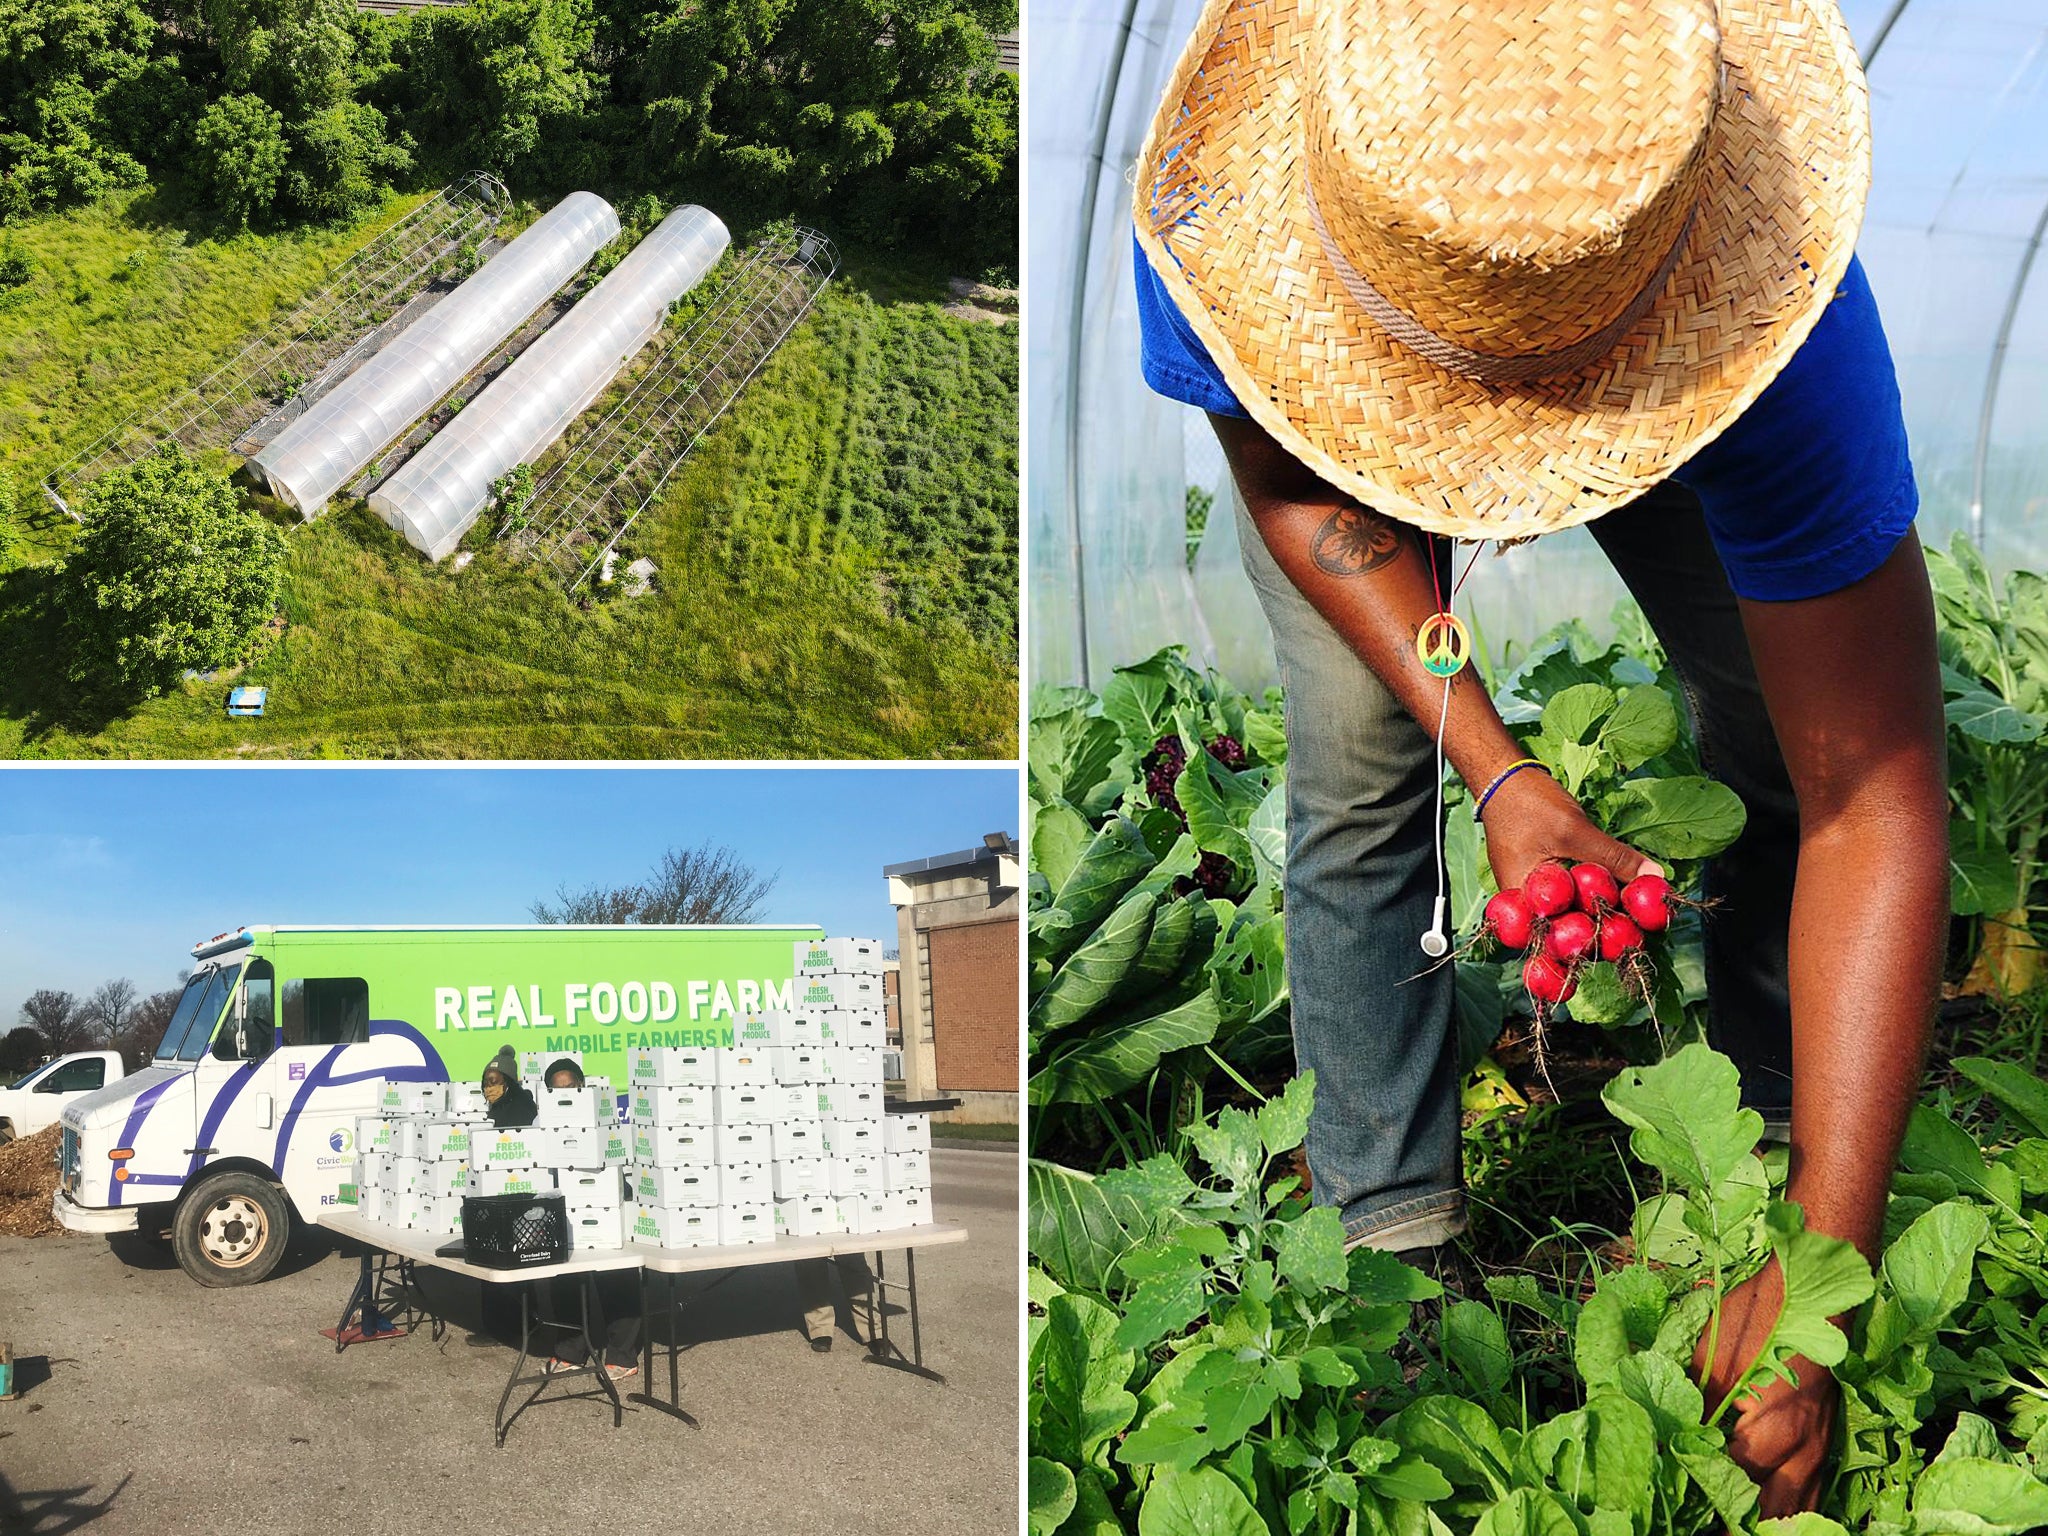 The farm is part of Civic Works, an AmeriCorps program in Baltimore, Maryland